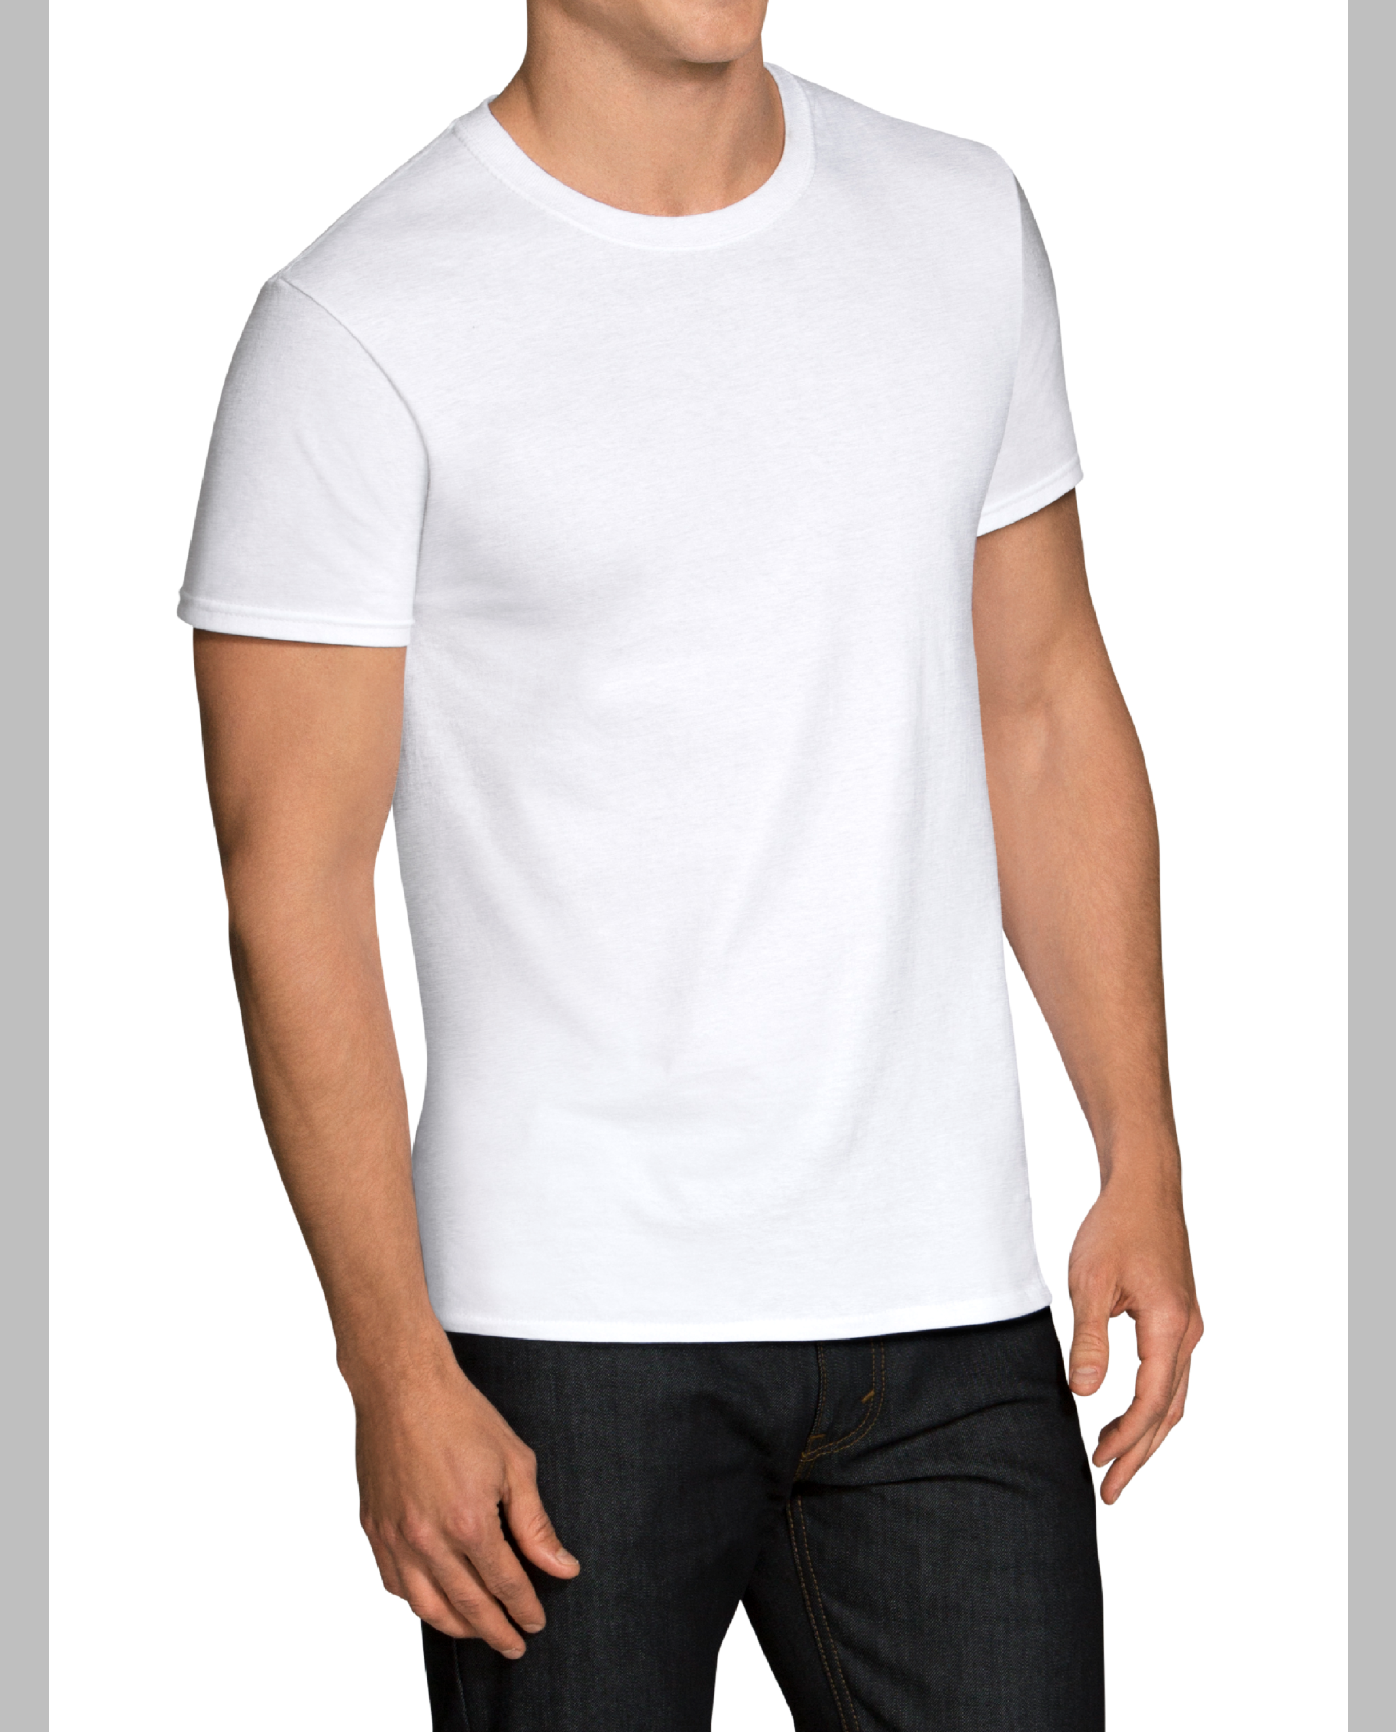 China sheer white t shirt mens pack top boutique, Pull and bear yellow shirt, branded long sleeve t shirts. 